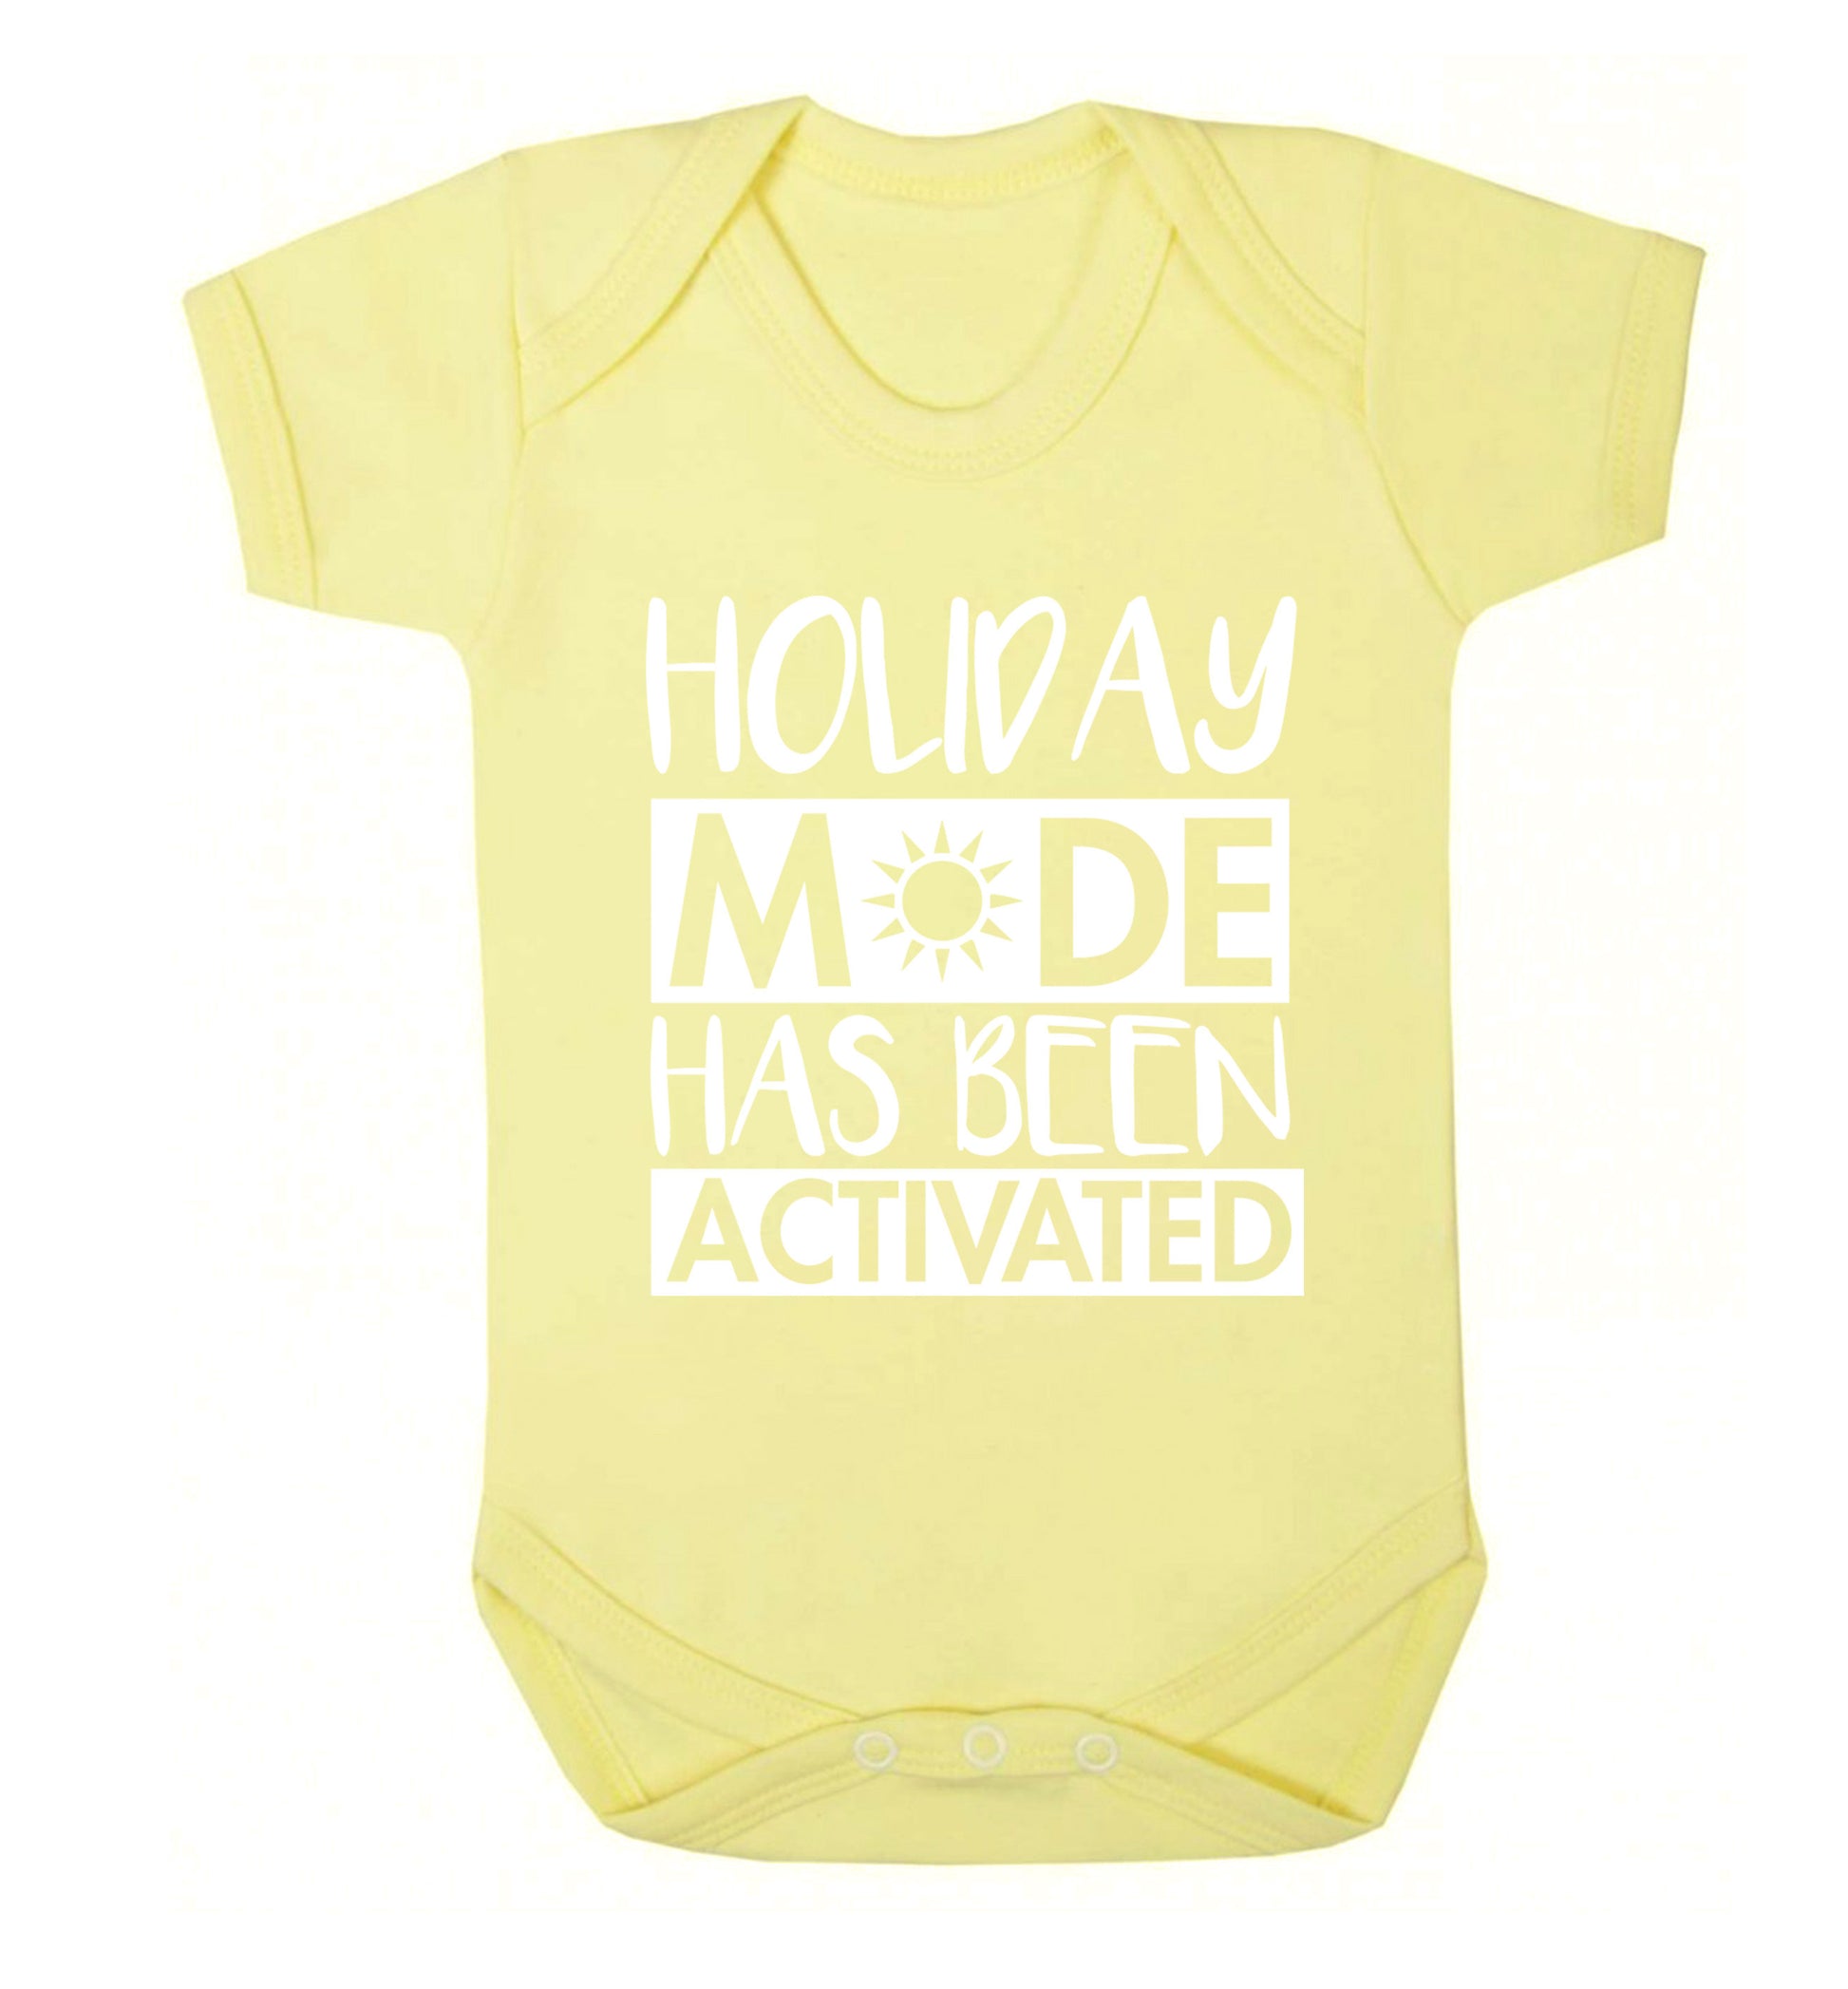 Holiday mode has been activated Baby Vest pale yellow 18-24 months